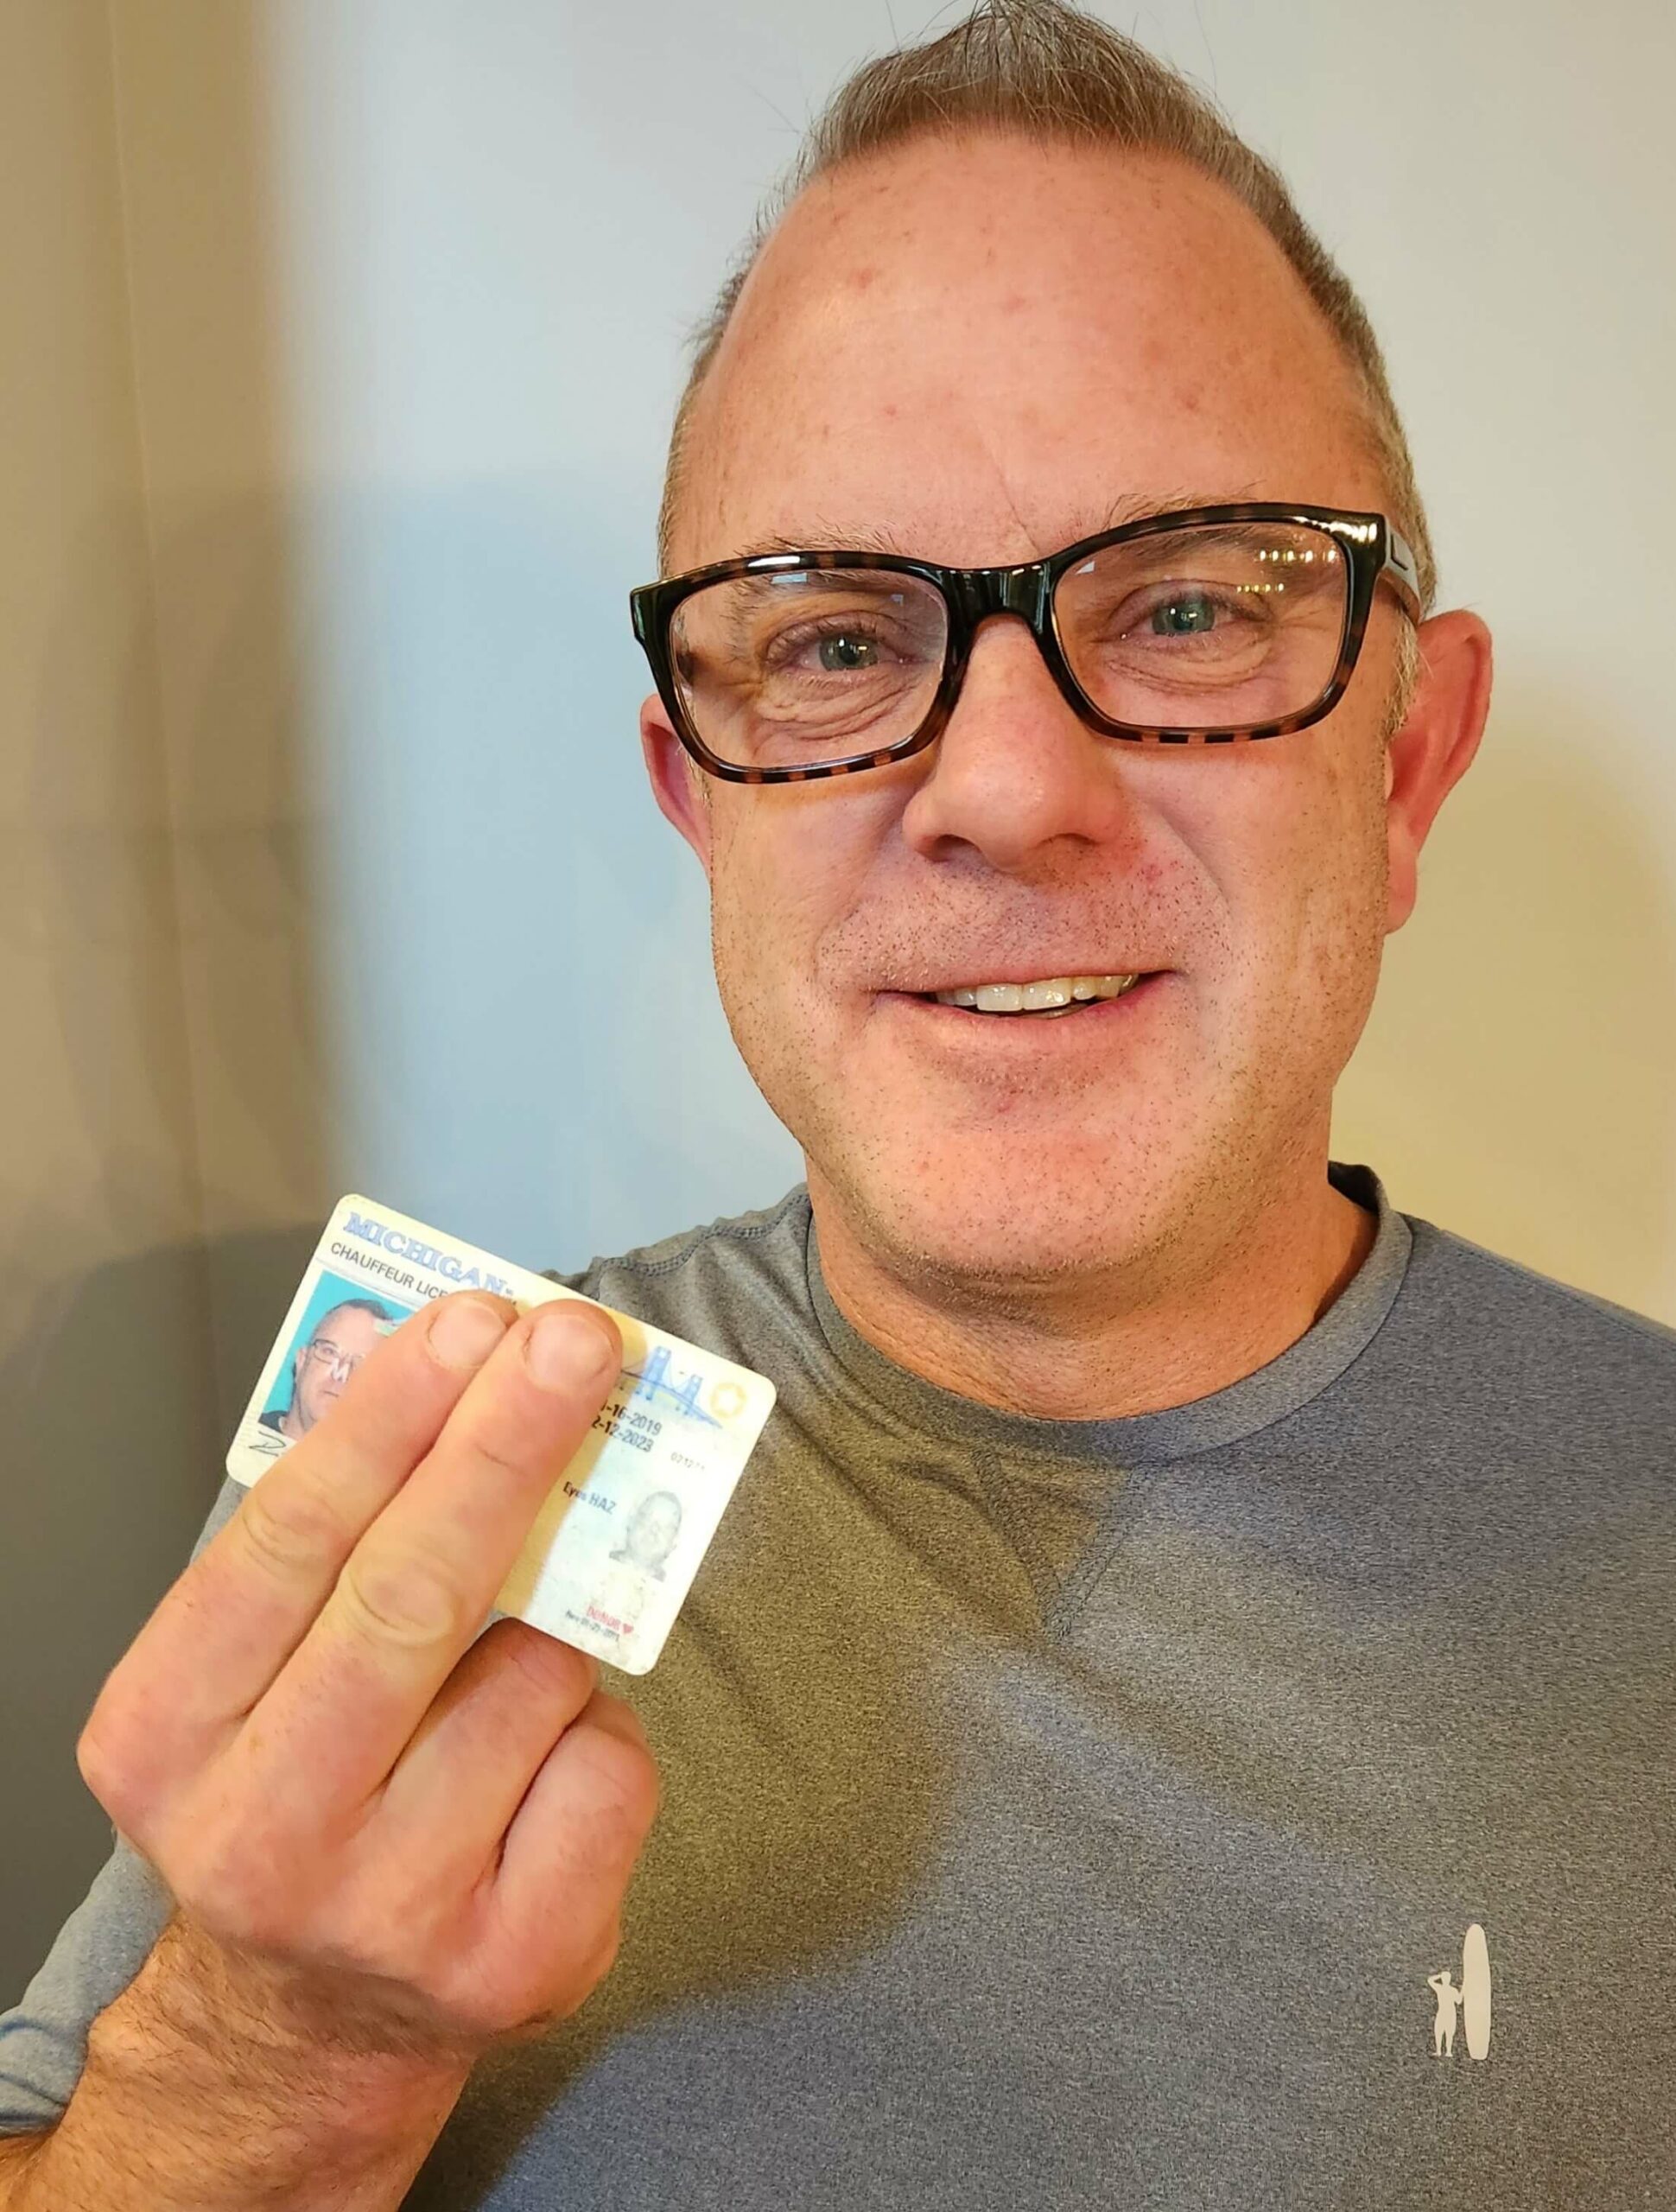 White man holding up his driver's license, showing donor heart symbol